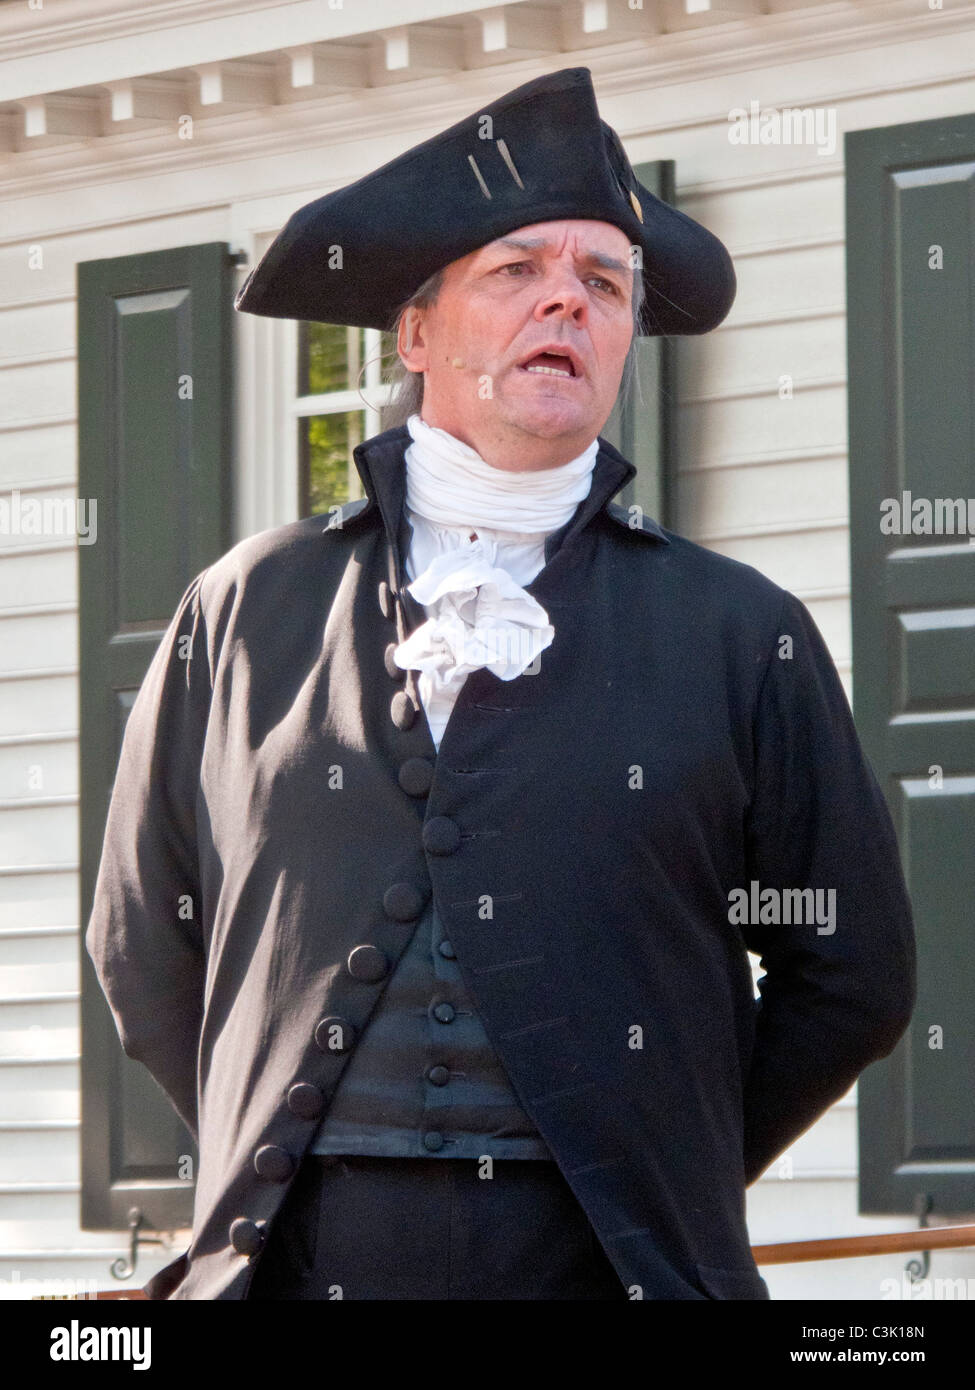 An actor portraying George Washington delivers a speech outside the Raleigh Tavern in Colonial Williamsburg, VA. Stock Photo